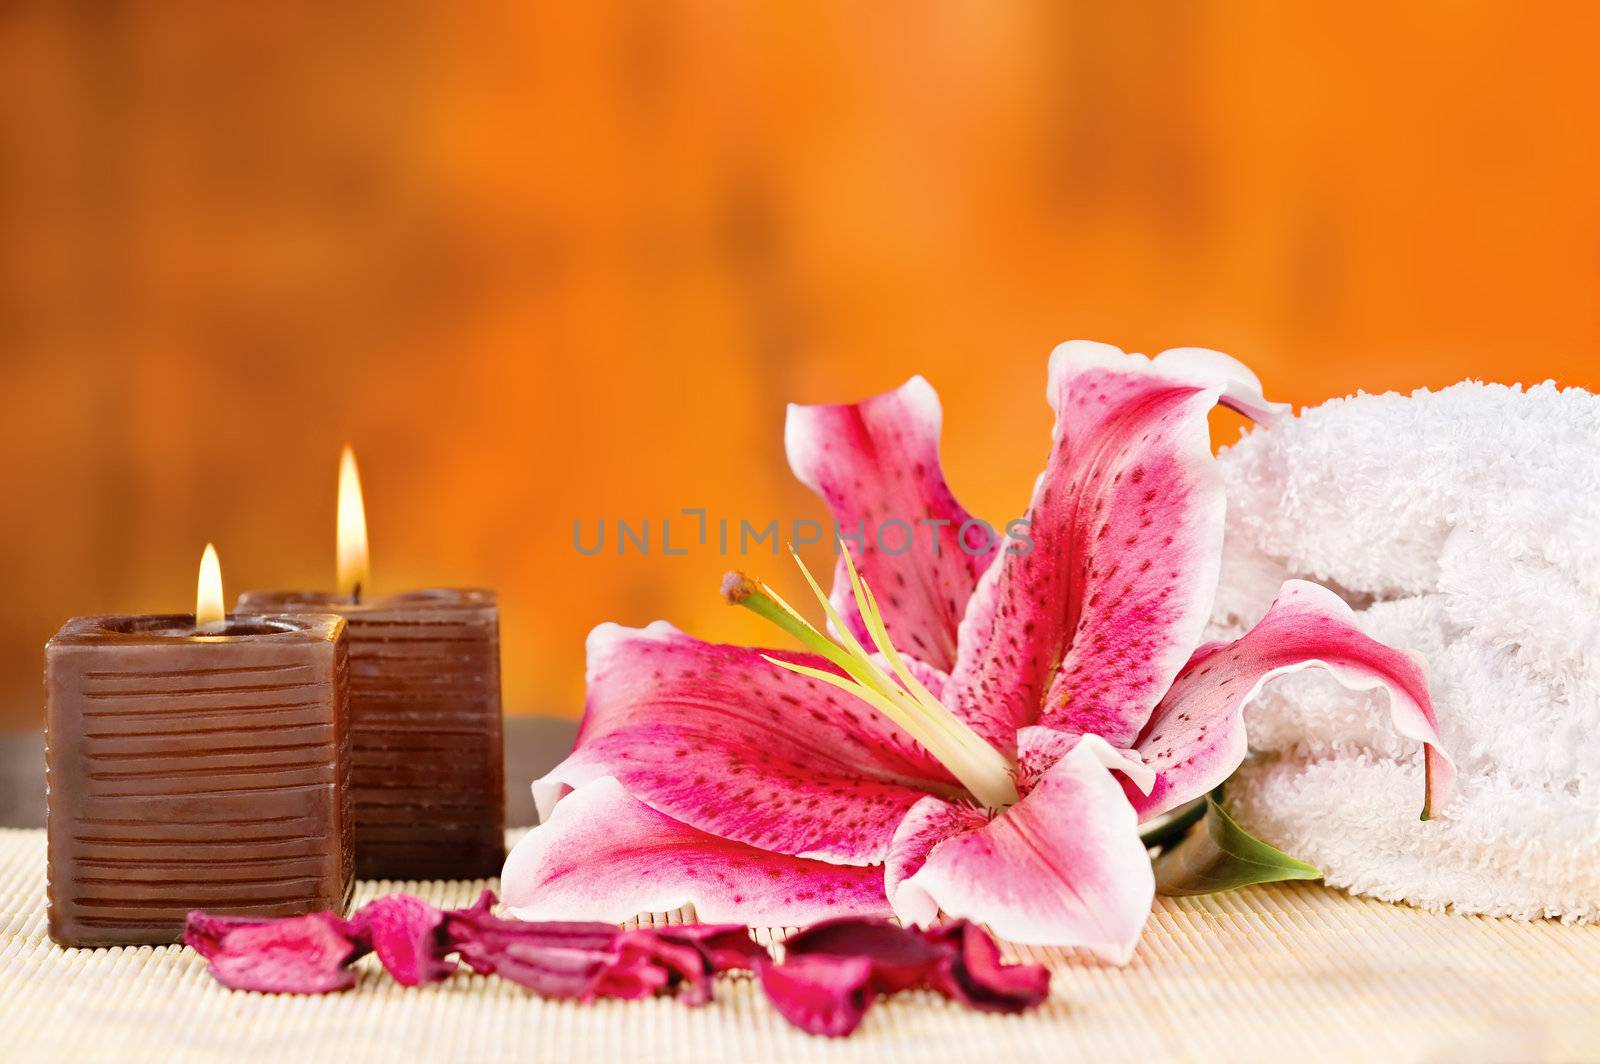 Par of candles with towel and orchid